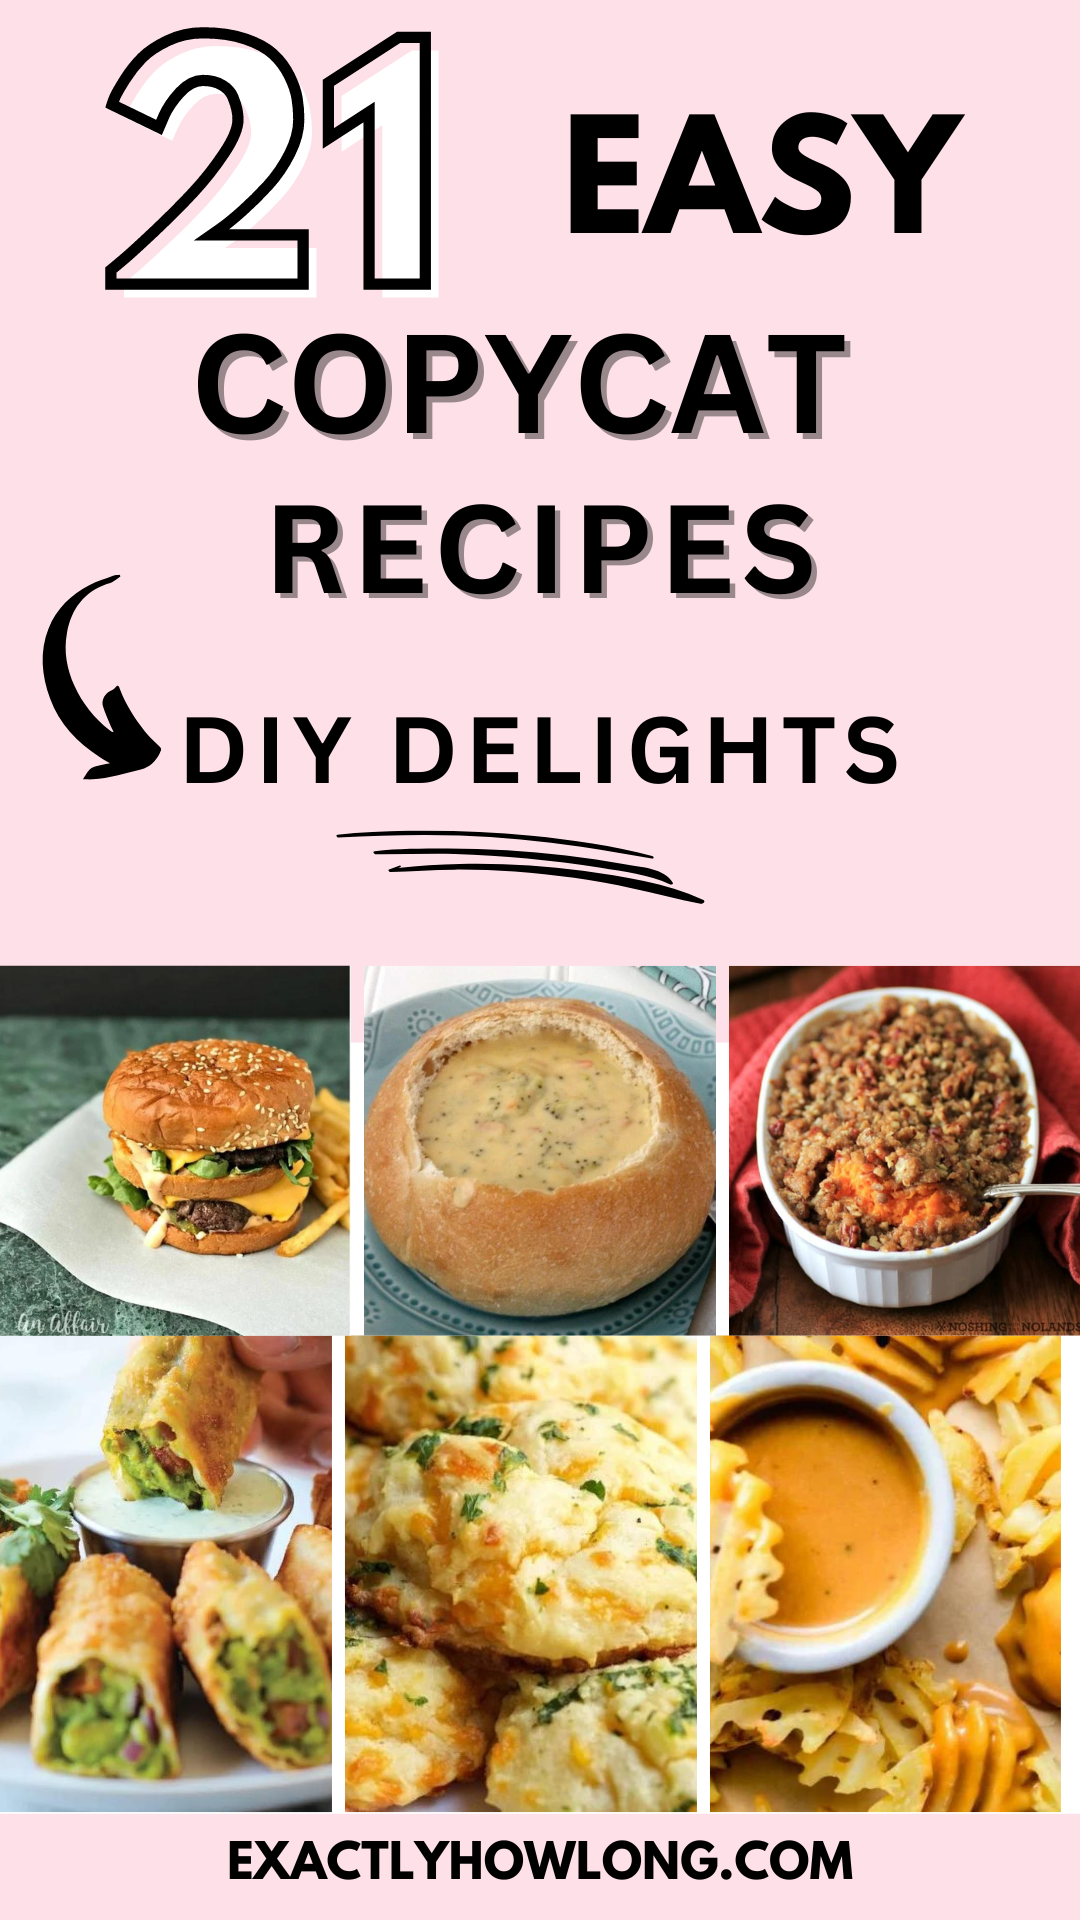 Fast and simple restaurant copycat recipes perfect for family dining.